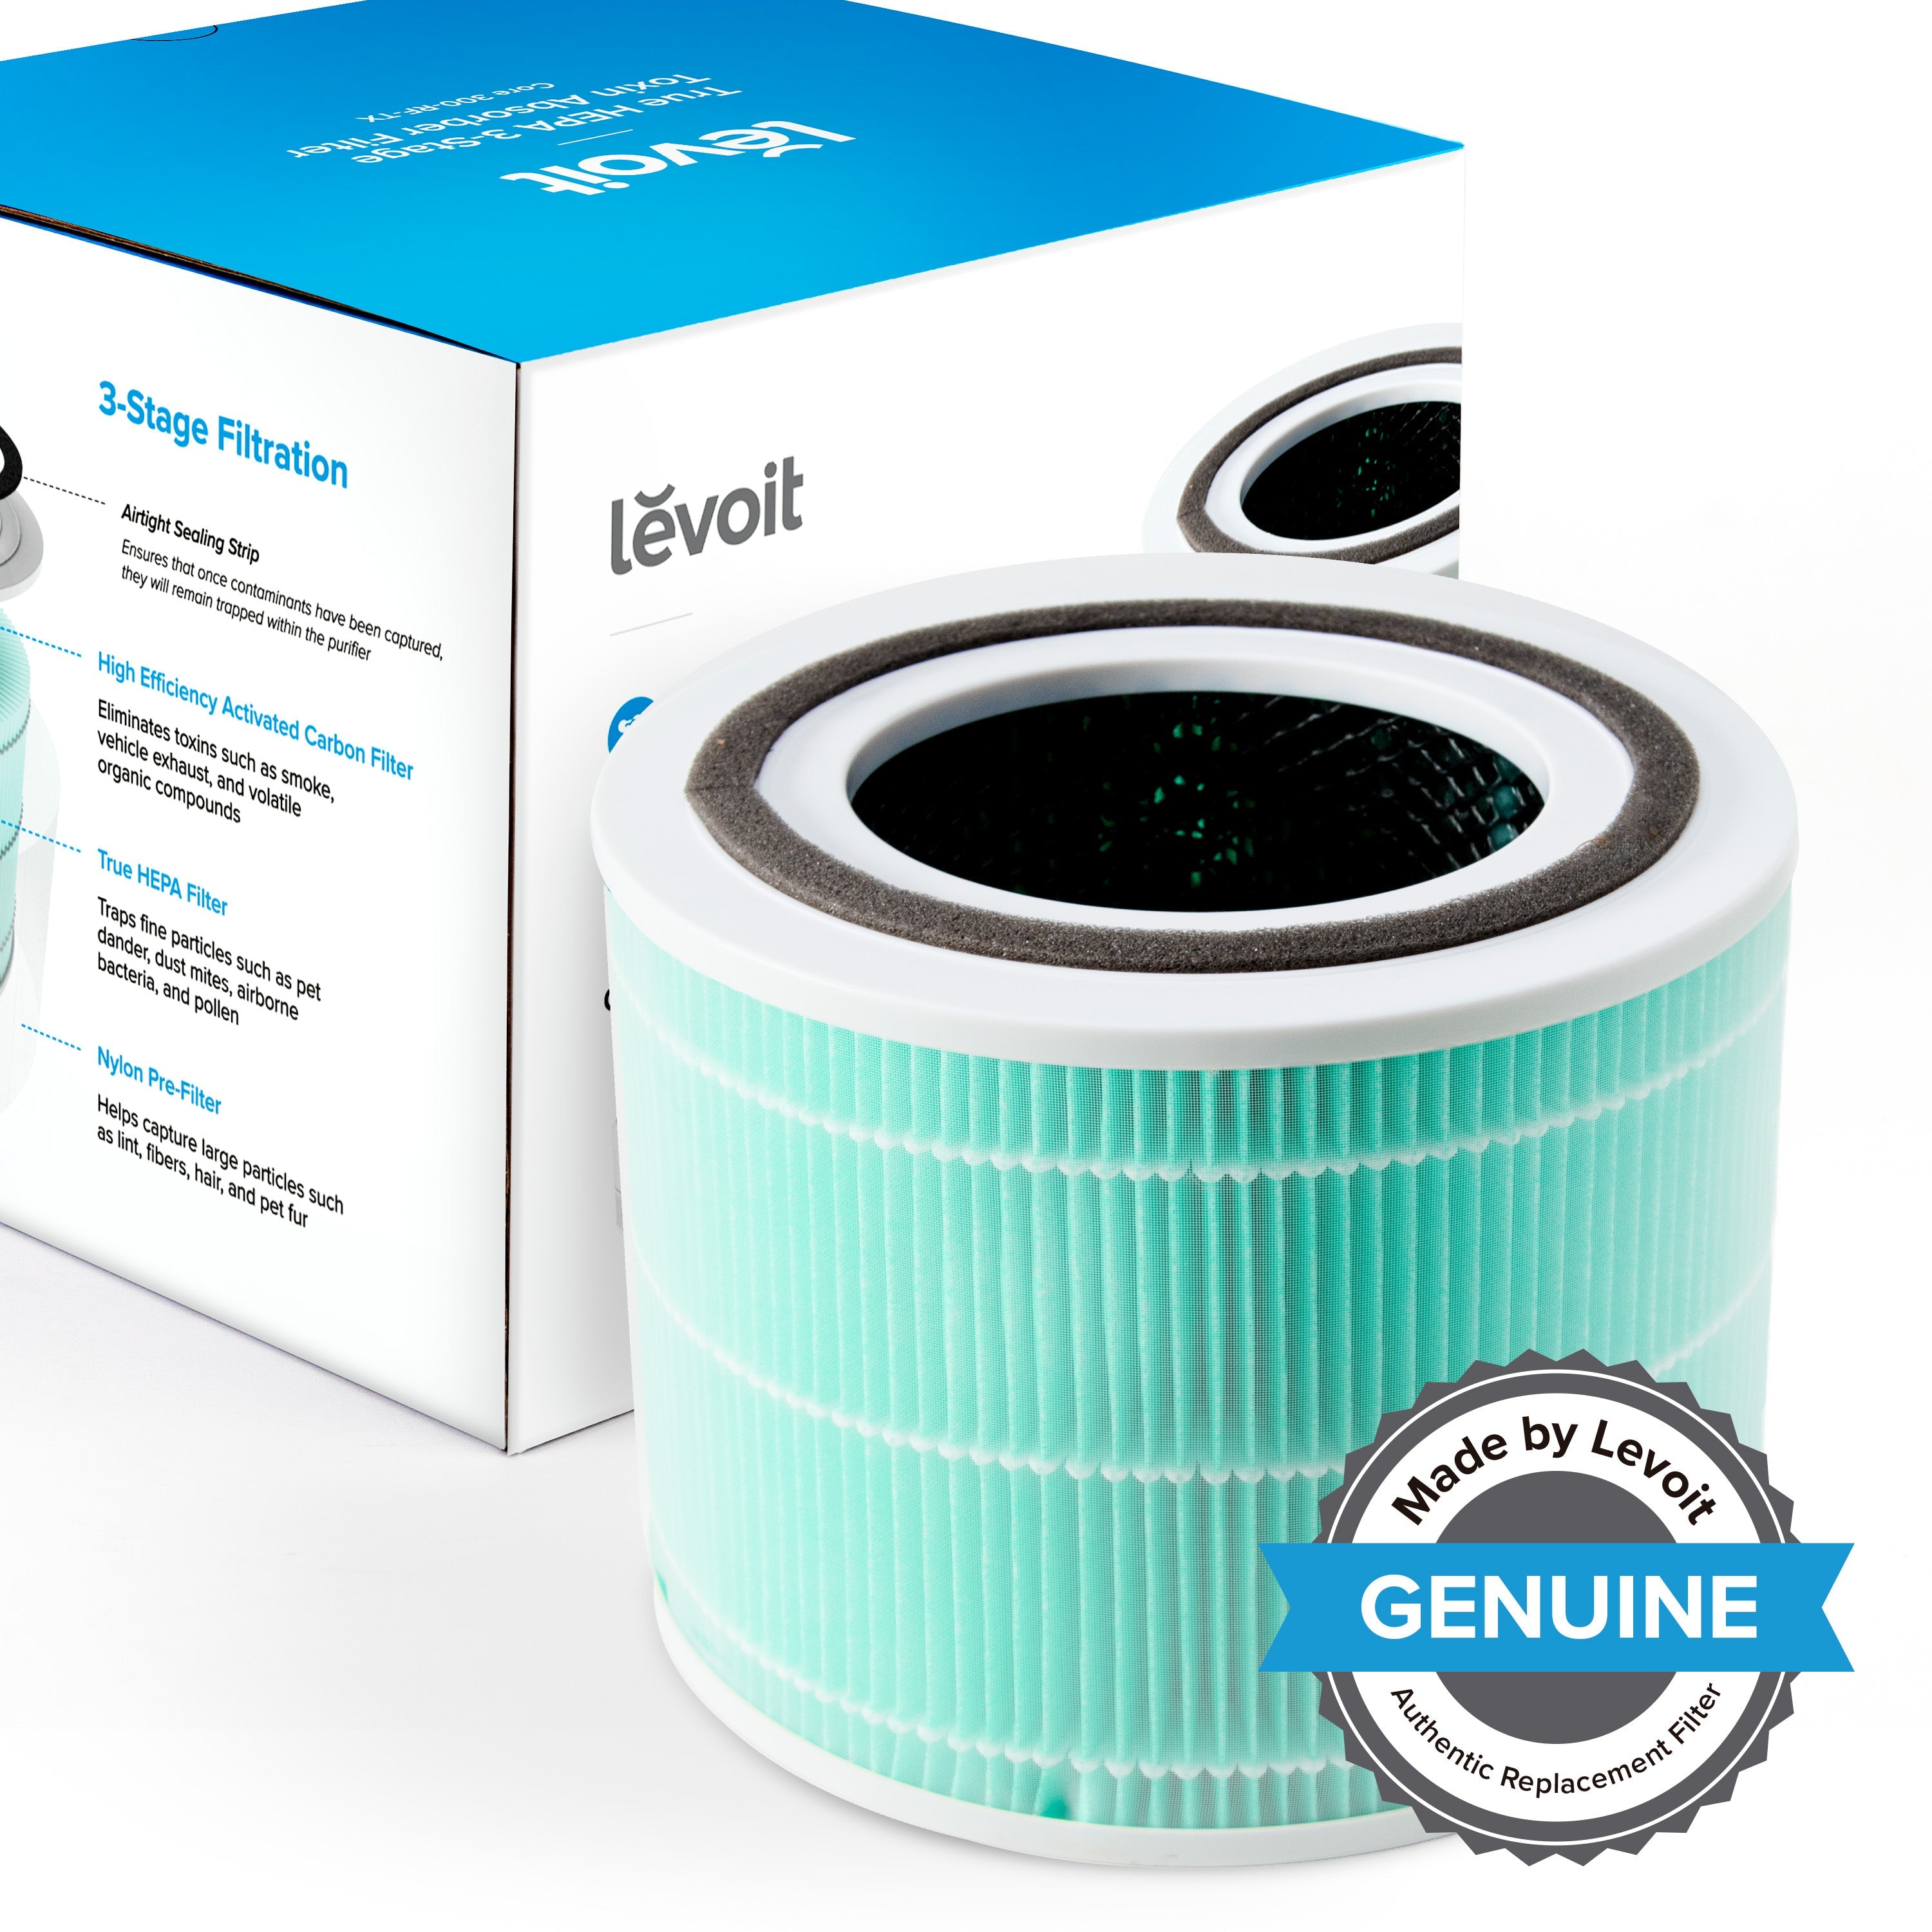 LEVOIT Core 300 Air Purifier 3-in-1 True HEPA Toxin Absorber Replacement Filter